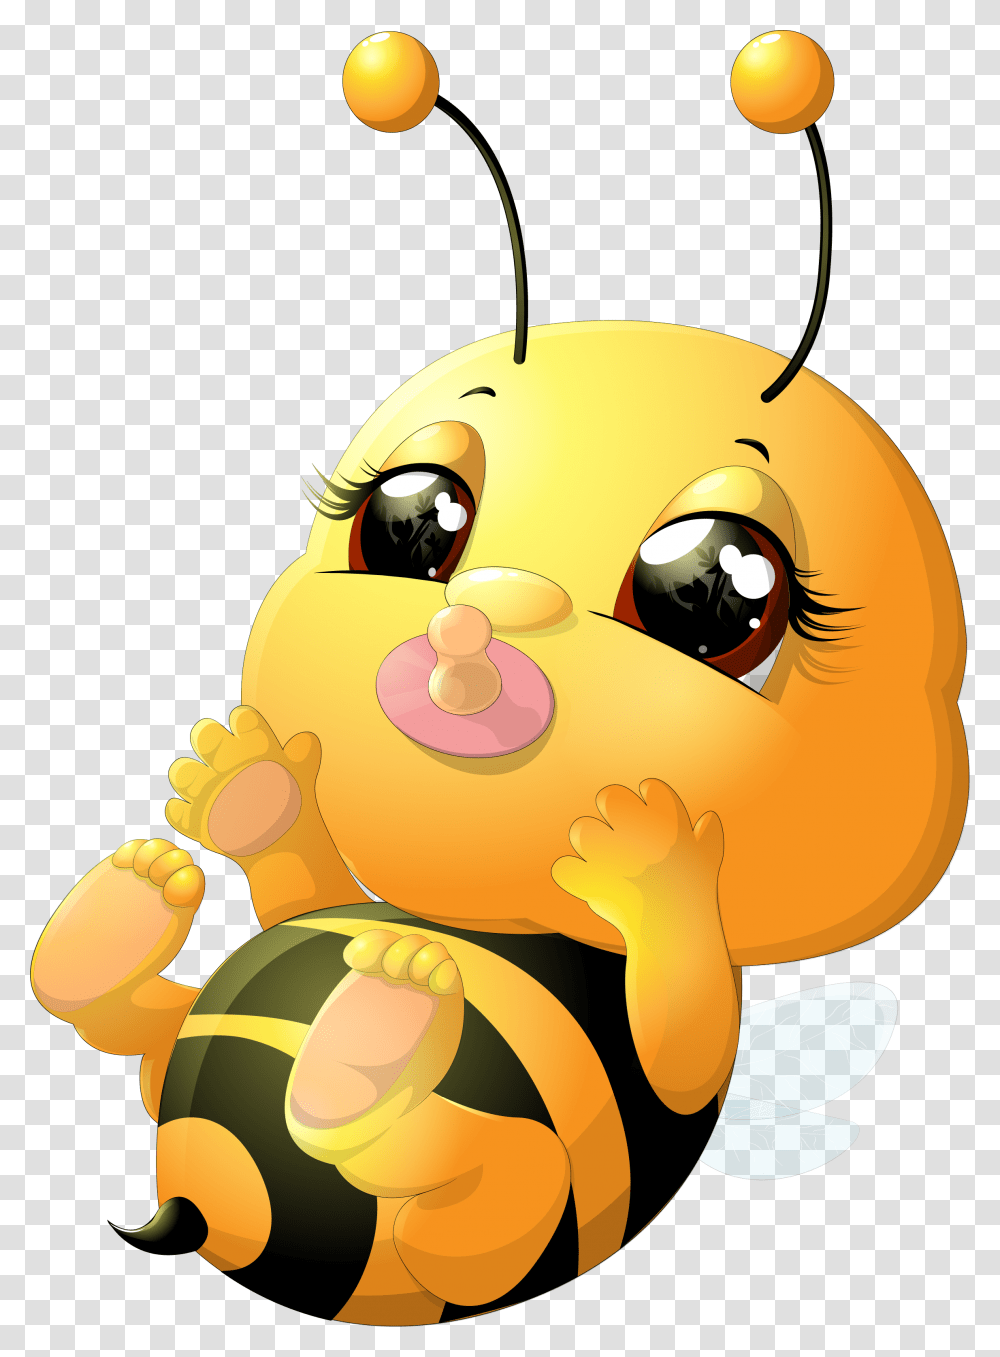 Beehive Honey Bee Transprent Baby Bee Cartoon, Animal, Invertebrate, Insect, Food Transparent Png